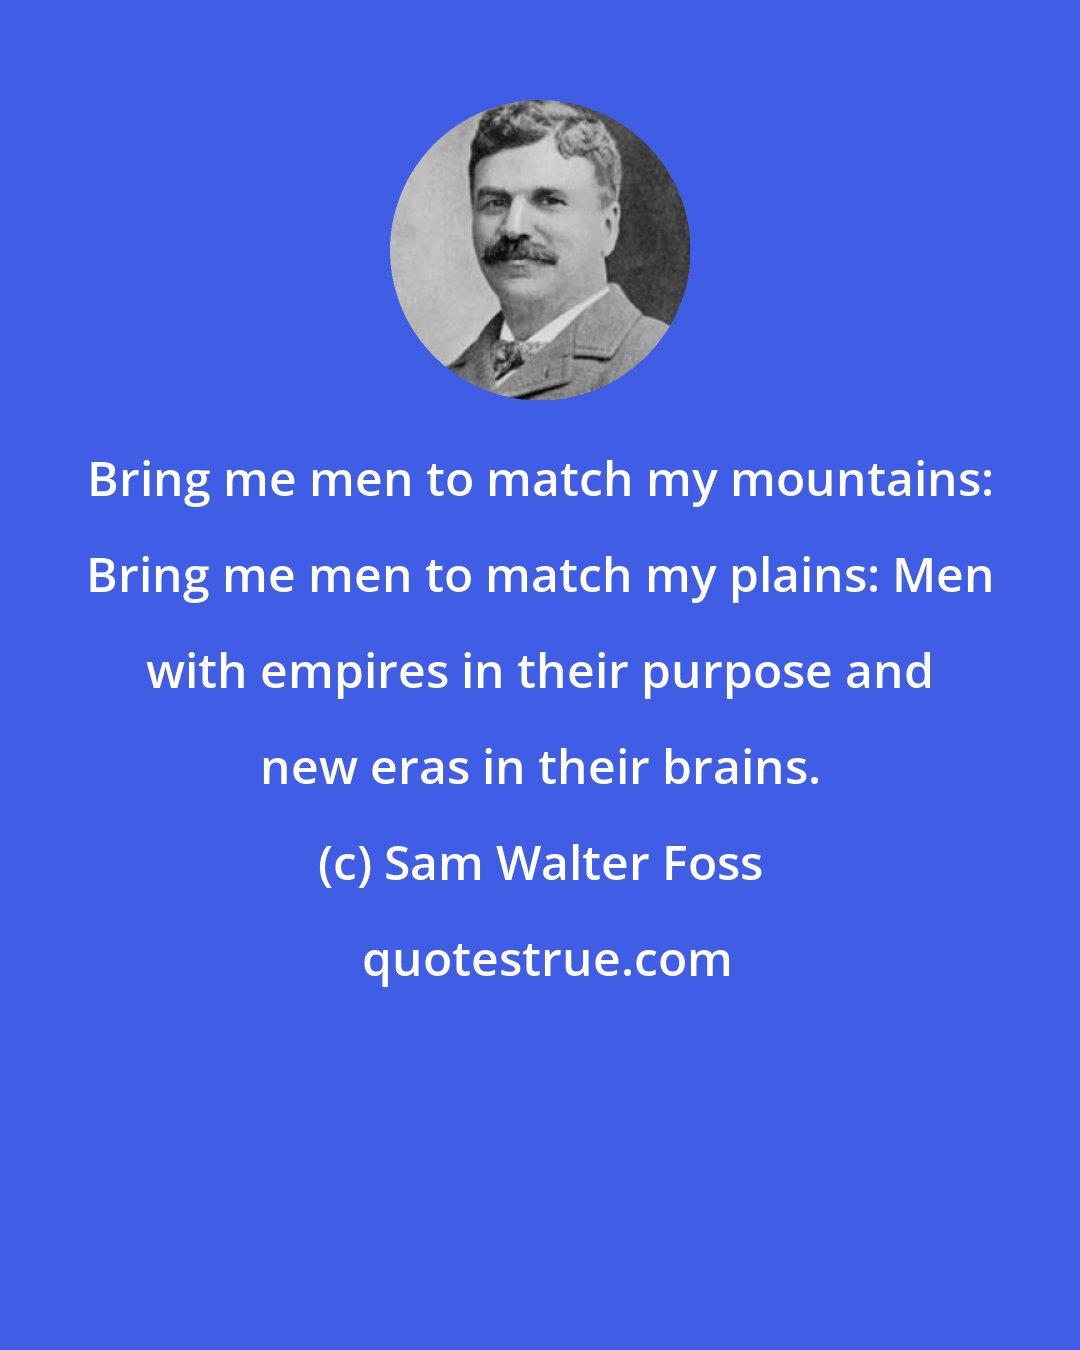 Sam Walter Foss: Bring me men to match my mountains: Bring me men to match my plains: Men with empires in their purpose and new eras in their brains.